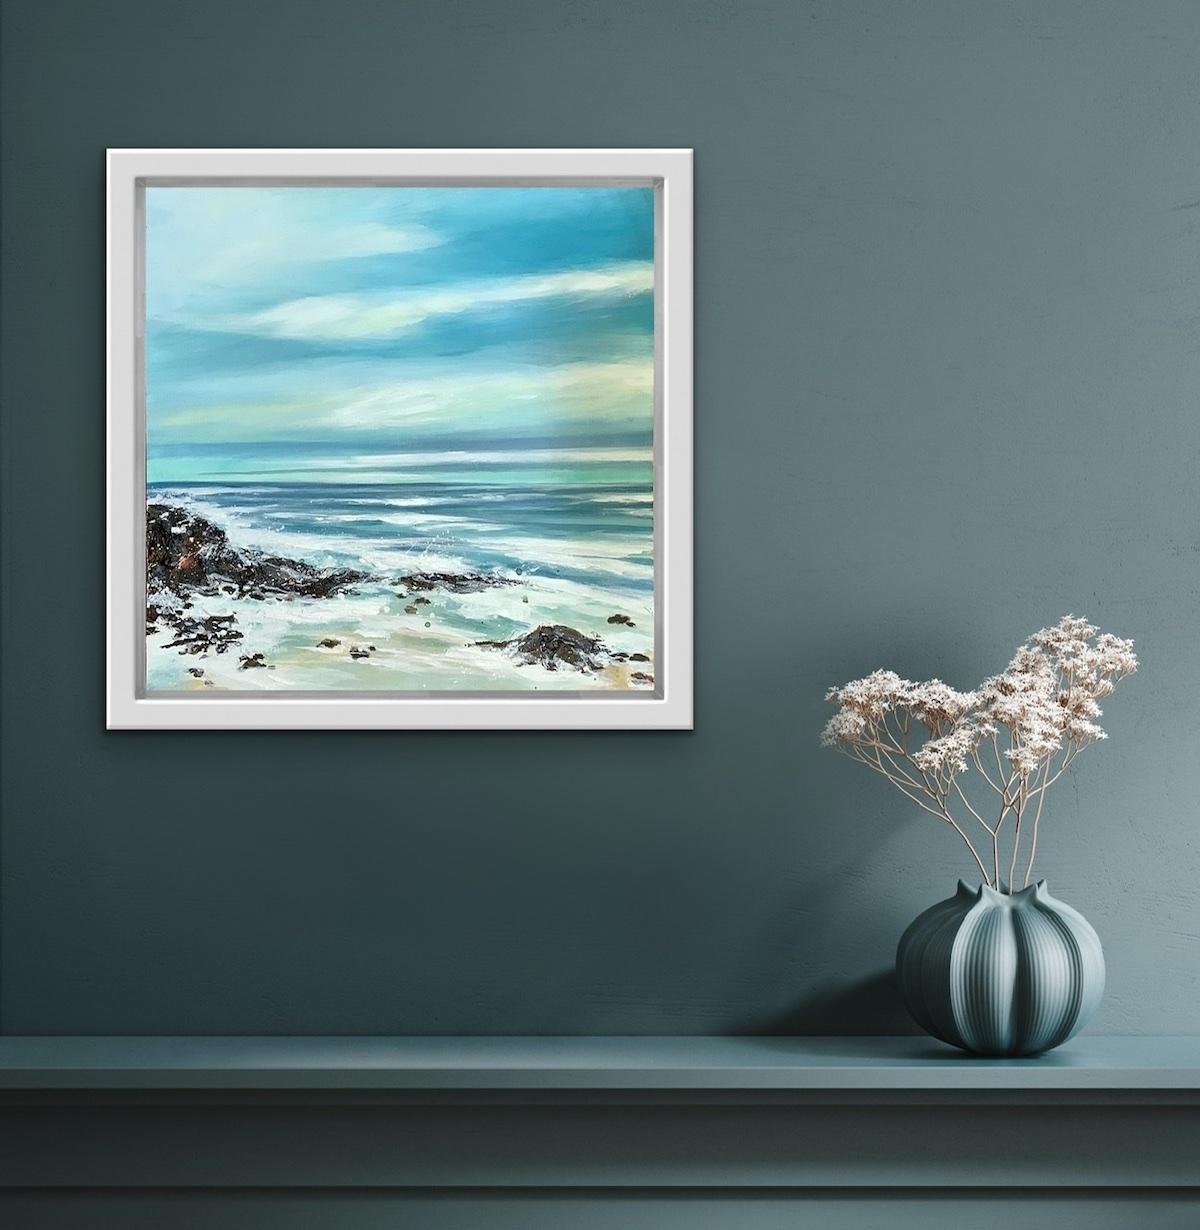 Priests Cove 1 by Adele Riley, contemporary art, original painting, seascape art For Sale 1